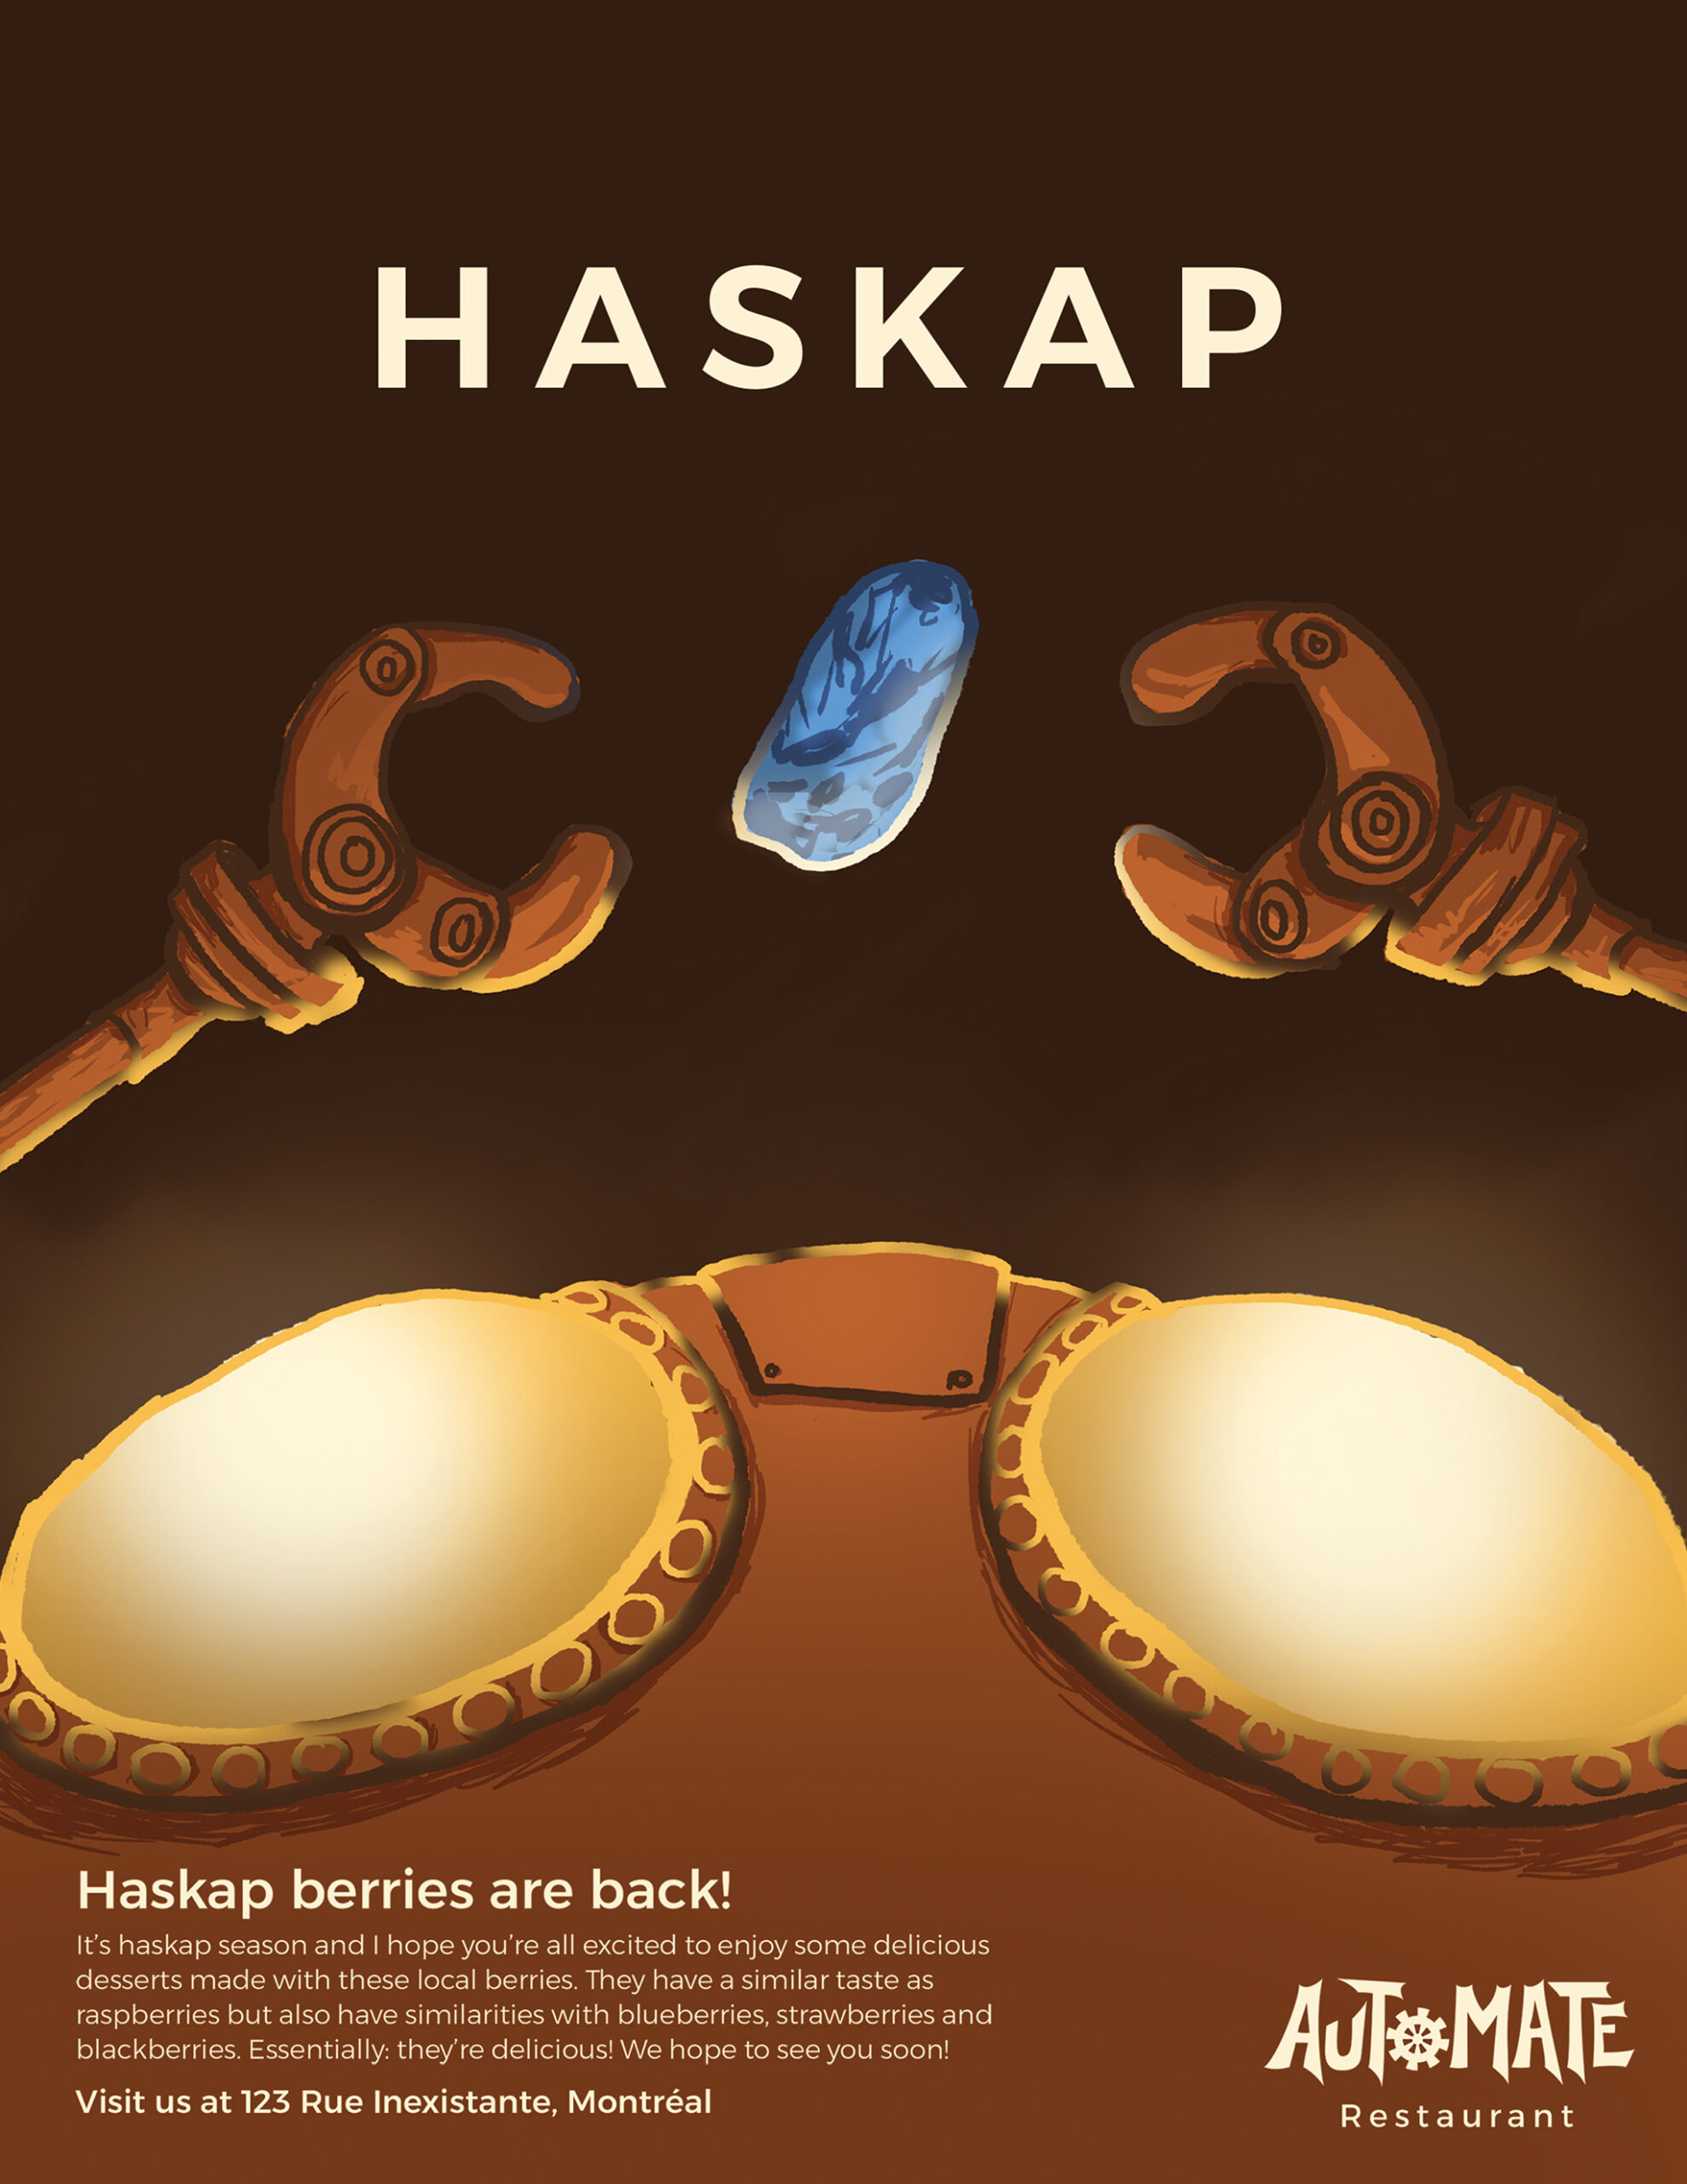 Magazine ad of a robot reaching for a haskap. 